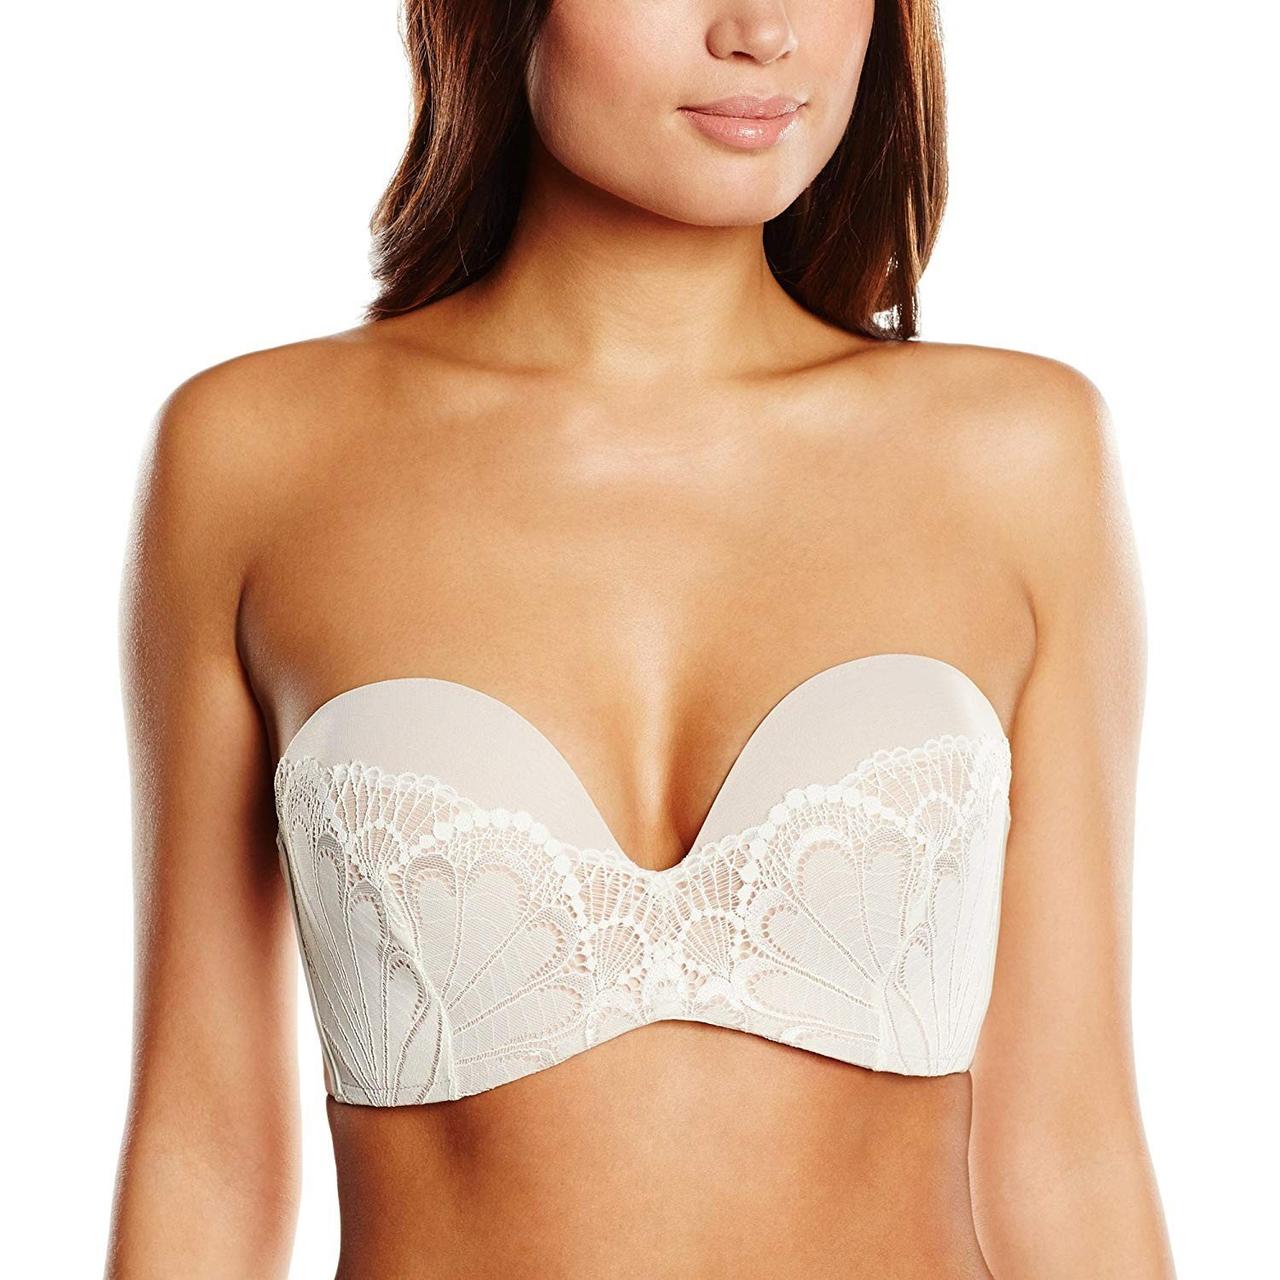 Strapless Bras with lift?, Weddings, Planning